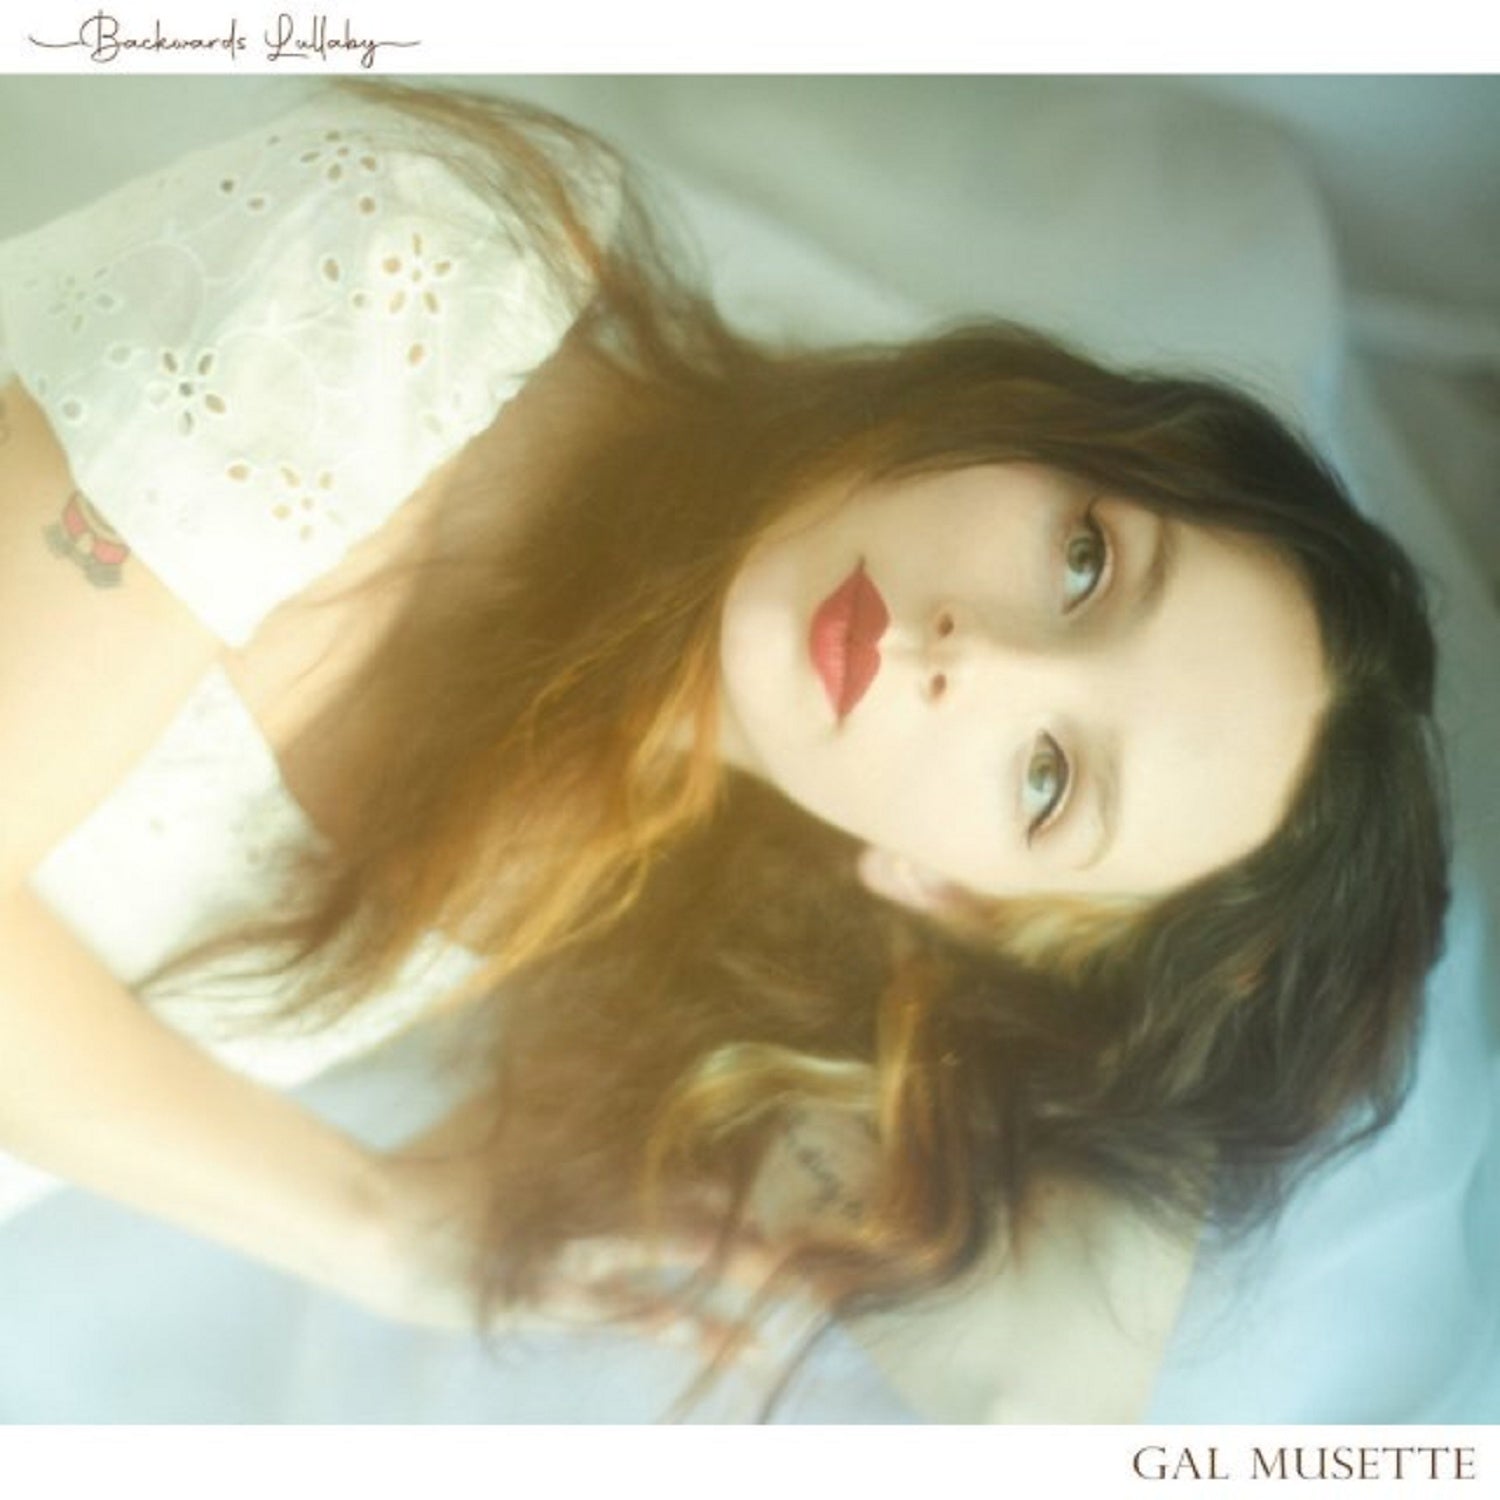 Gal Musette – ‘Backwards Lullaby’